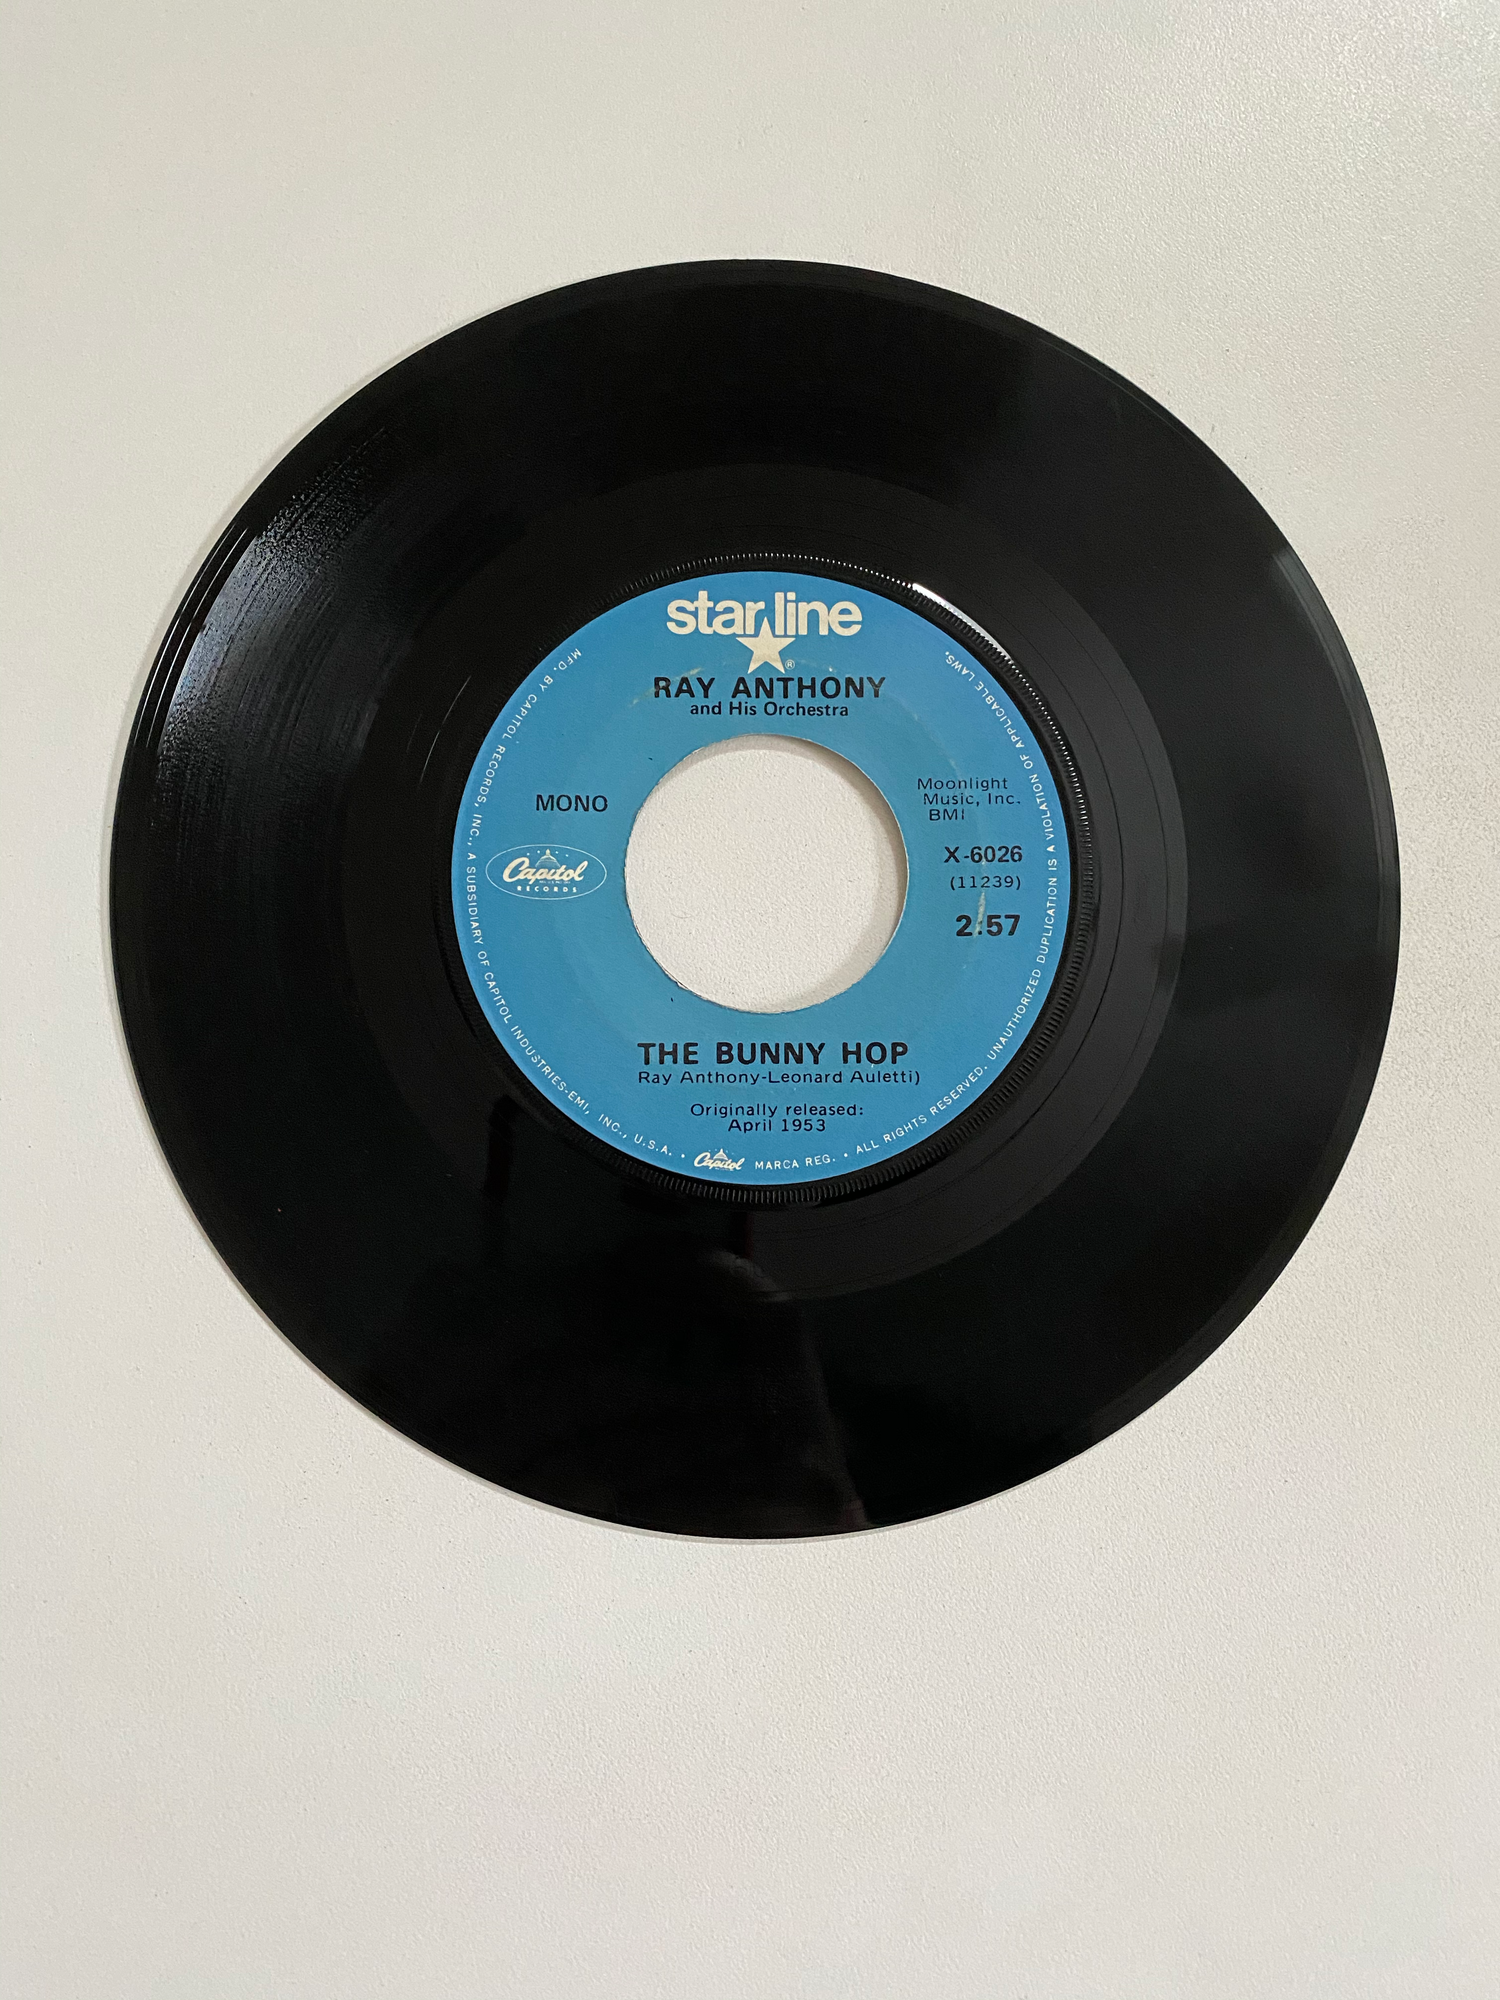 Ray Anthony and his Orchestra - The Bunny Hop | 45 The Vintedge Co.